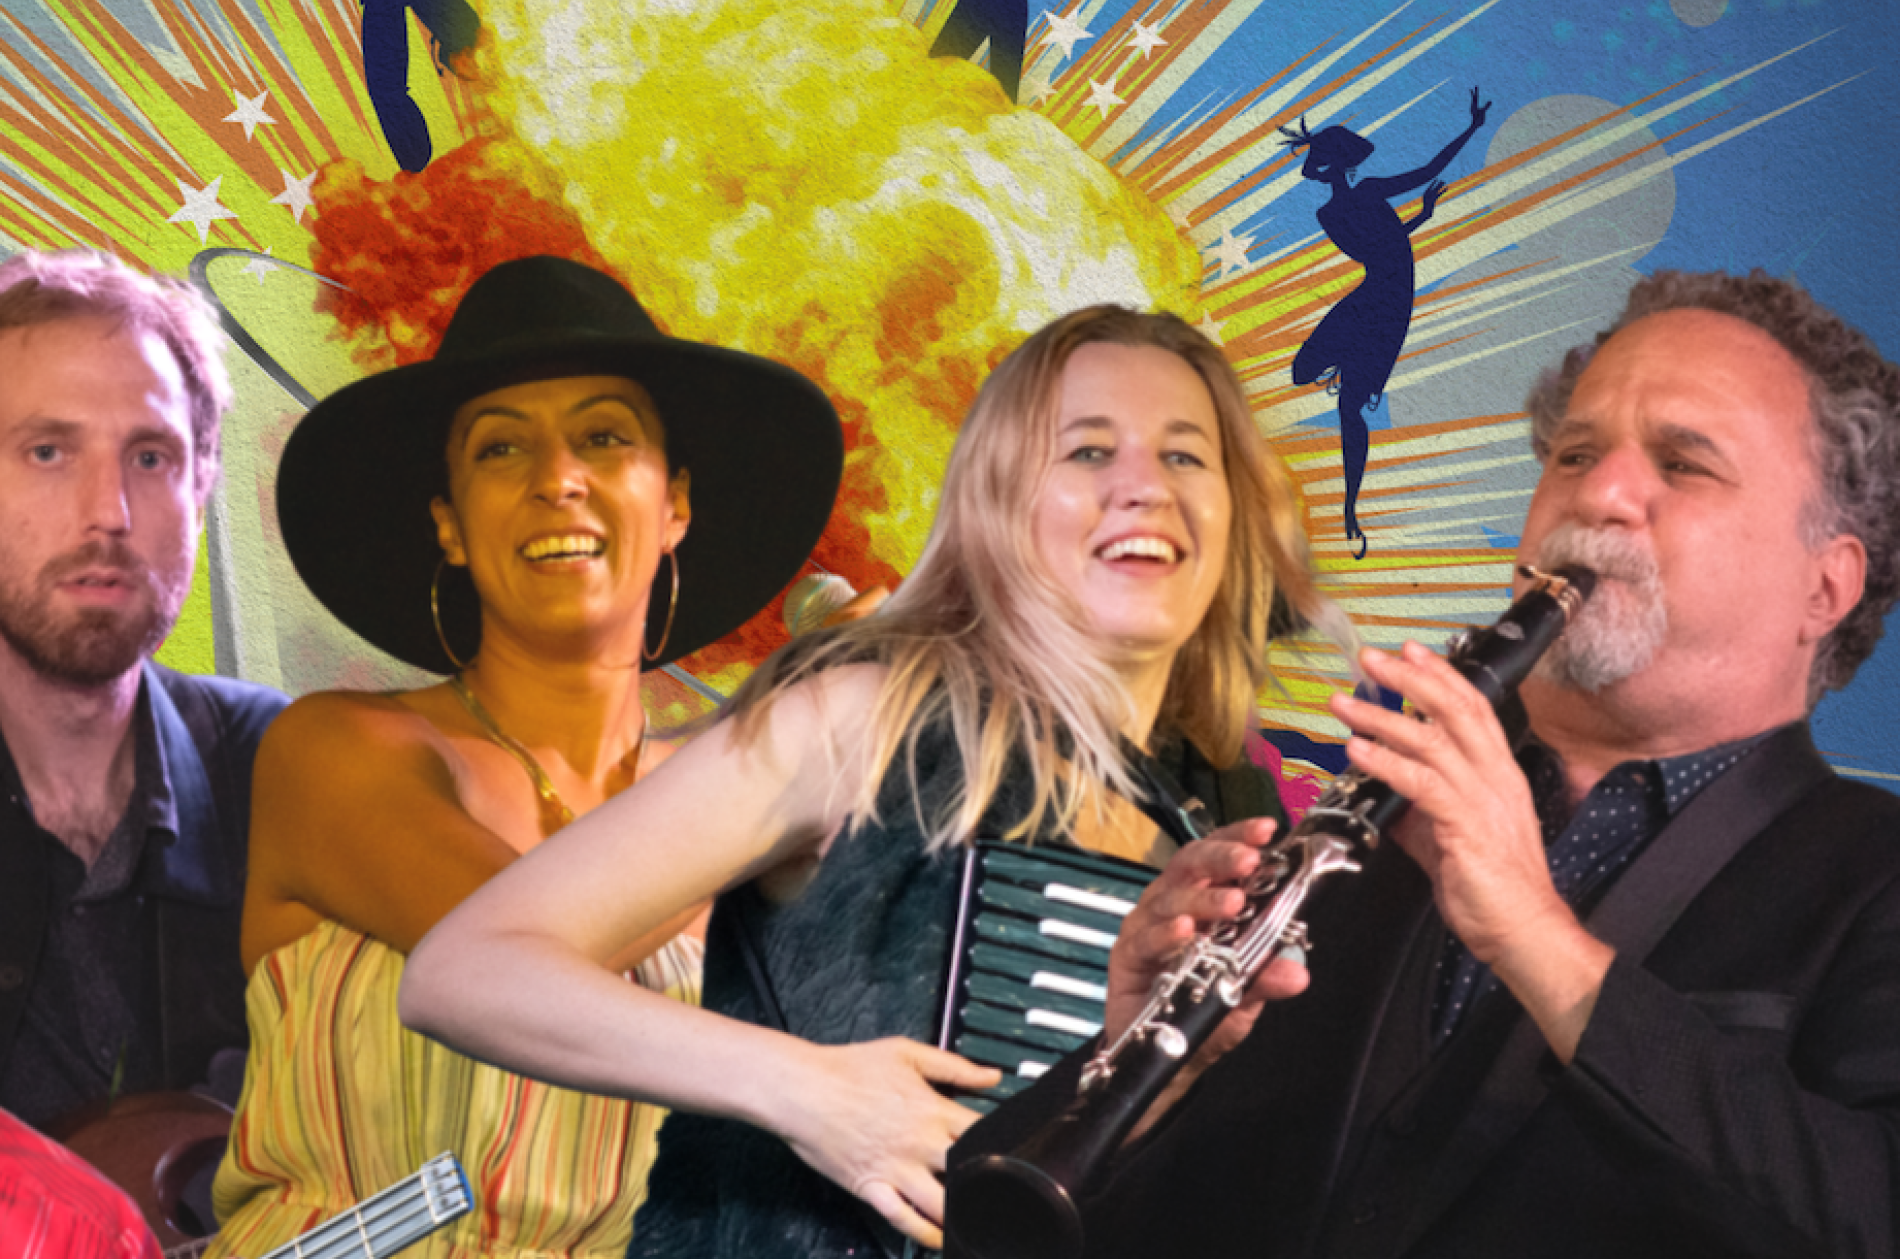 Four performers including an accordionist and clarinetist superimposed on a sunburst graphic